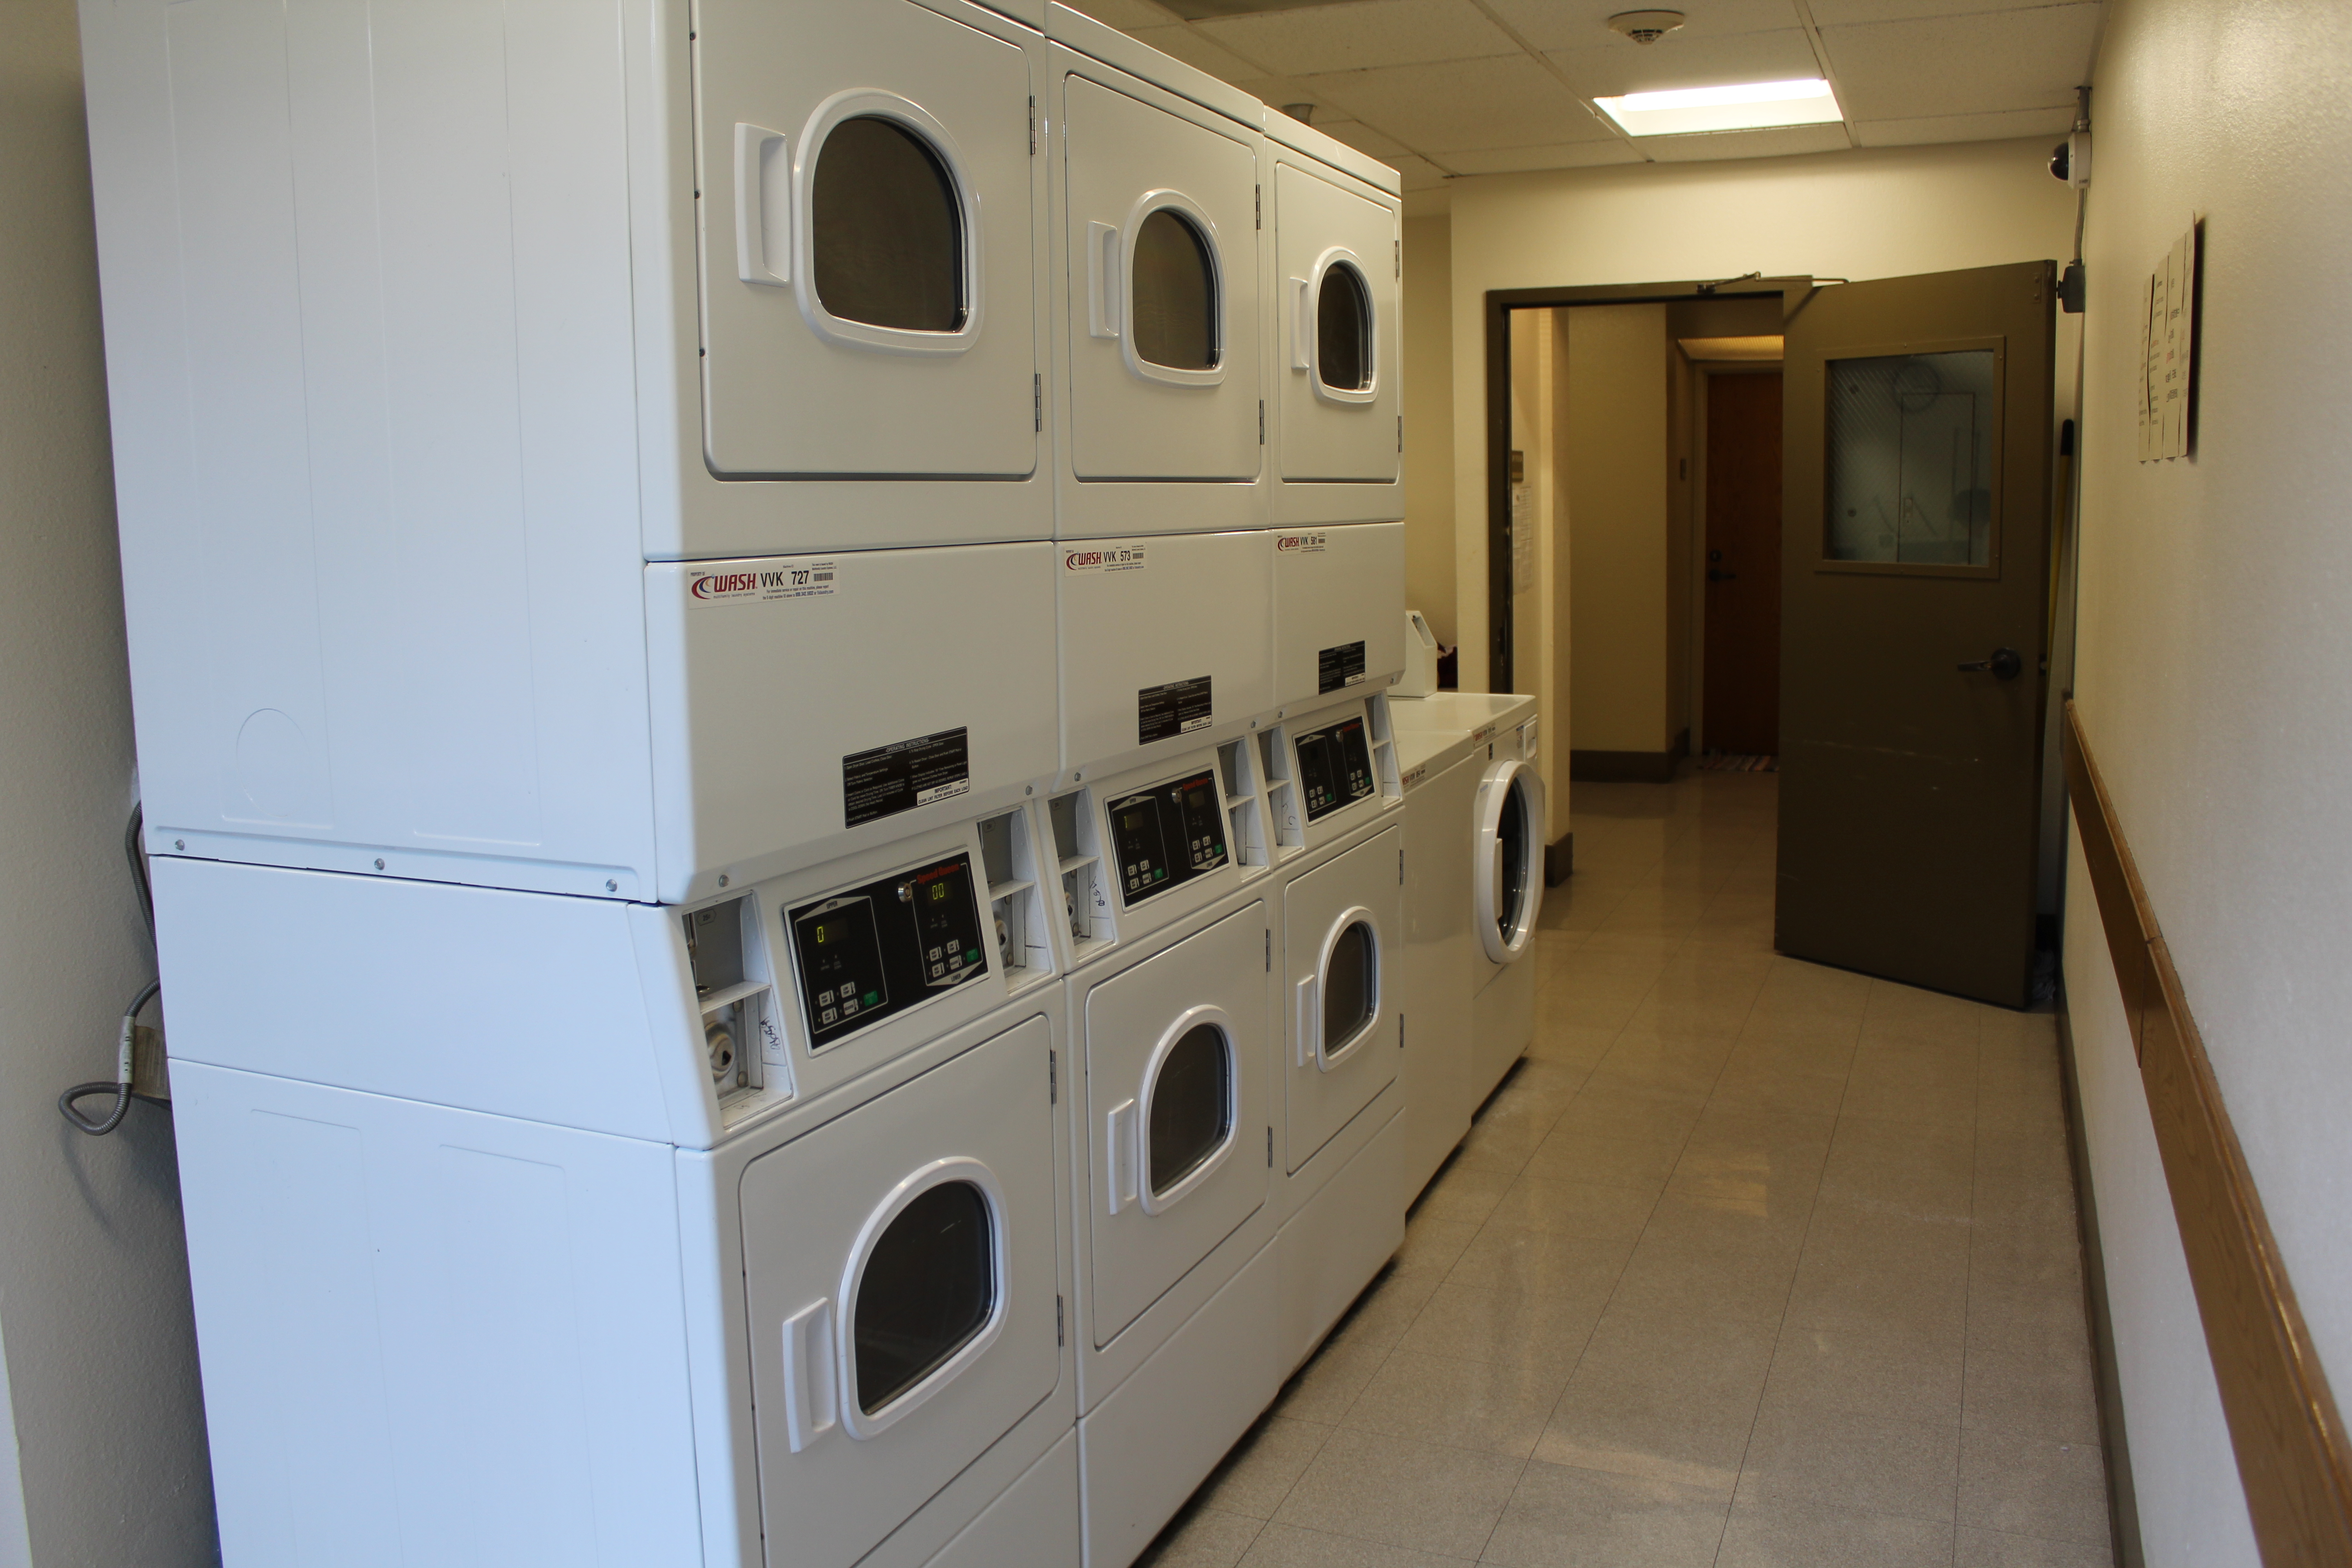 Interior view of a laundry room in Angelus Plaza 2 showing 7 white machines.